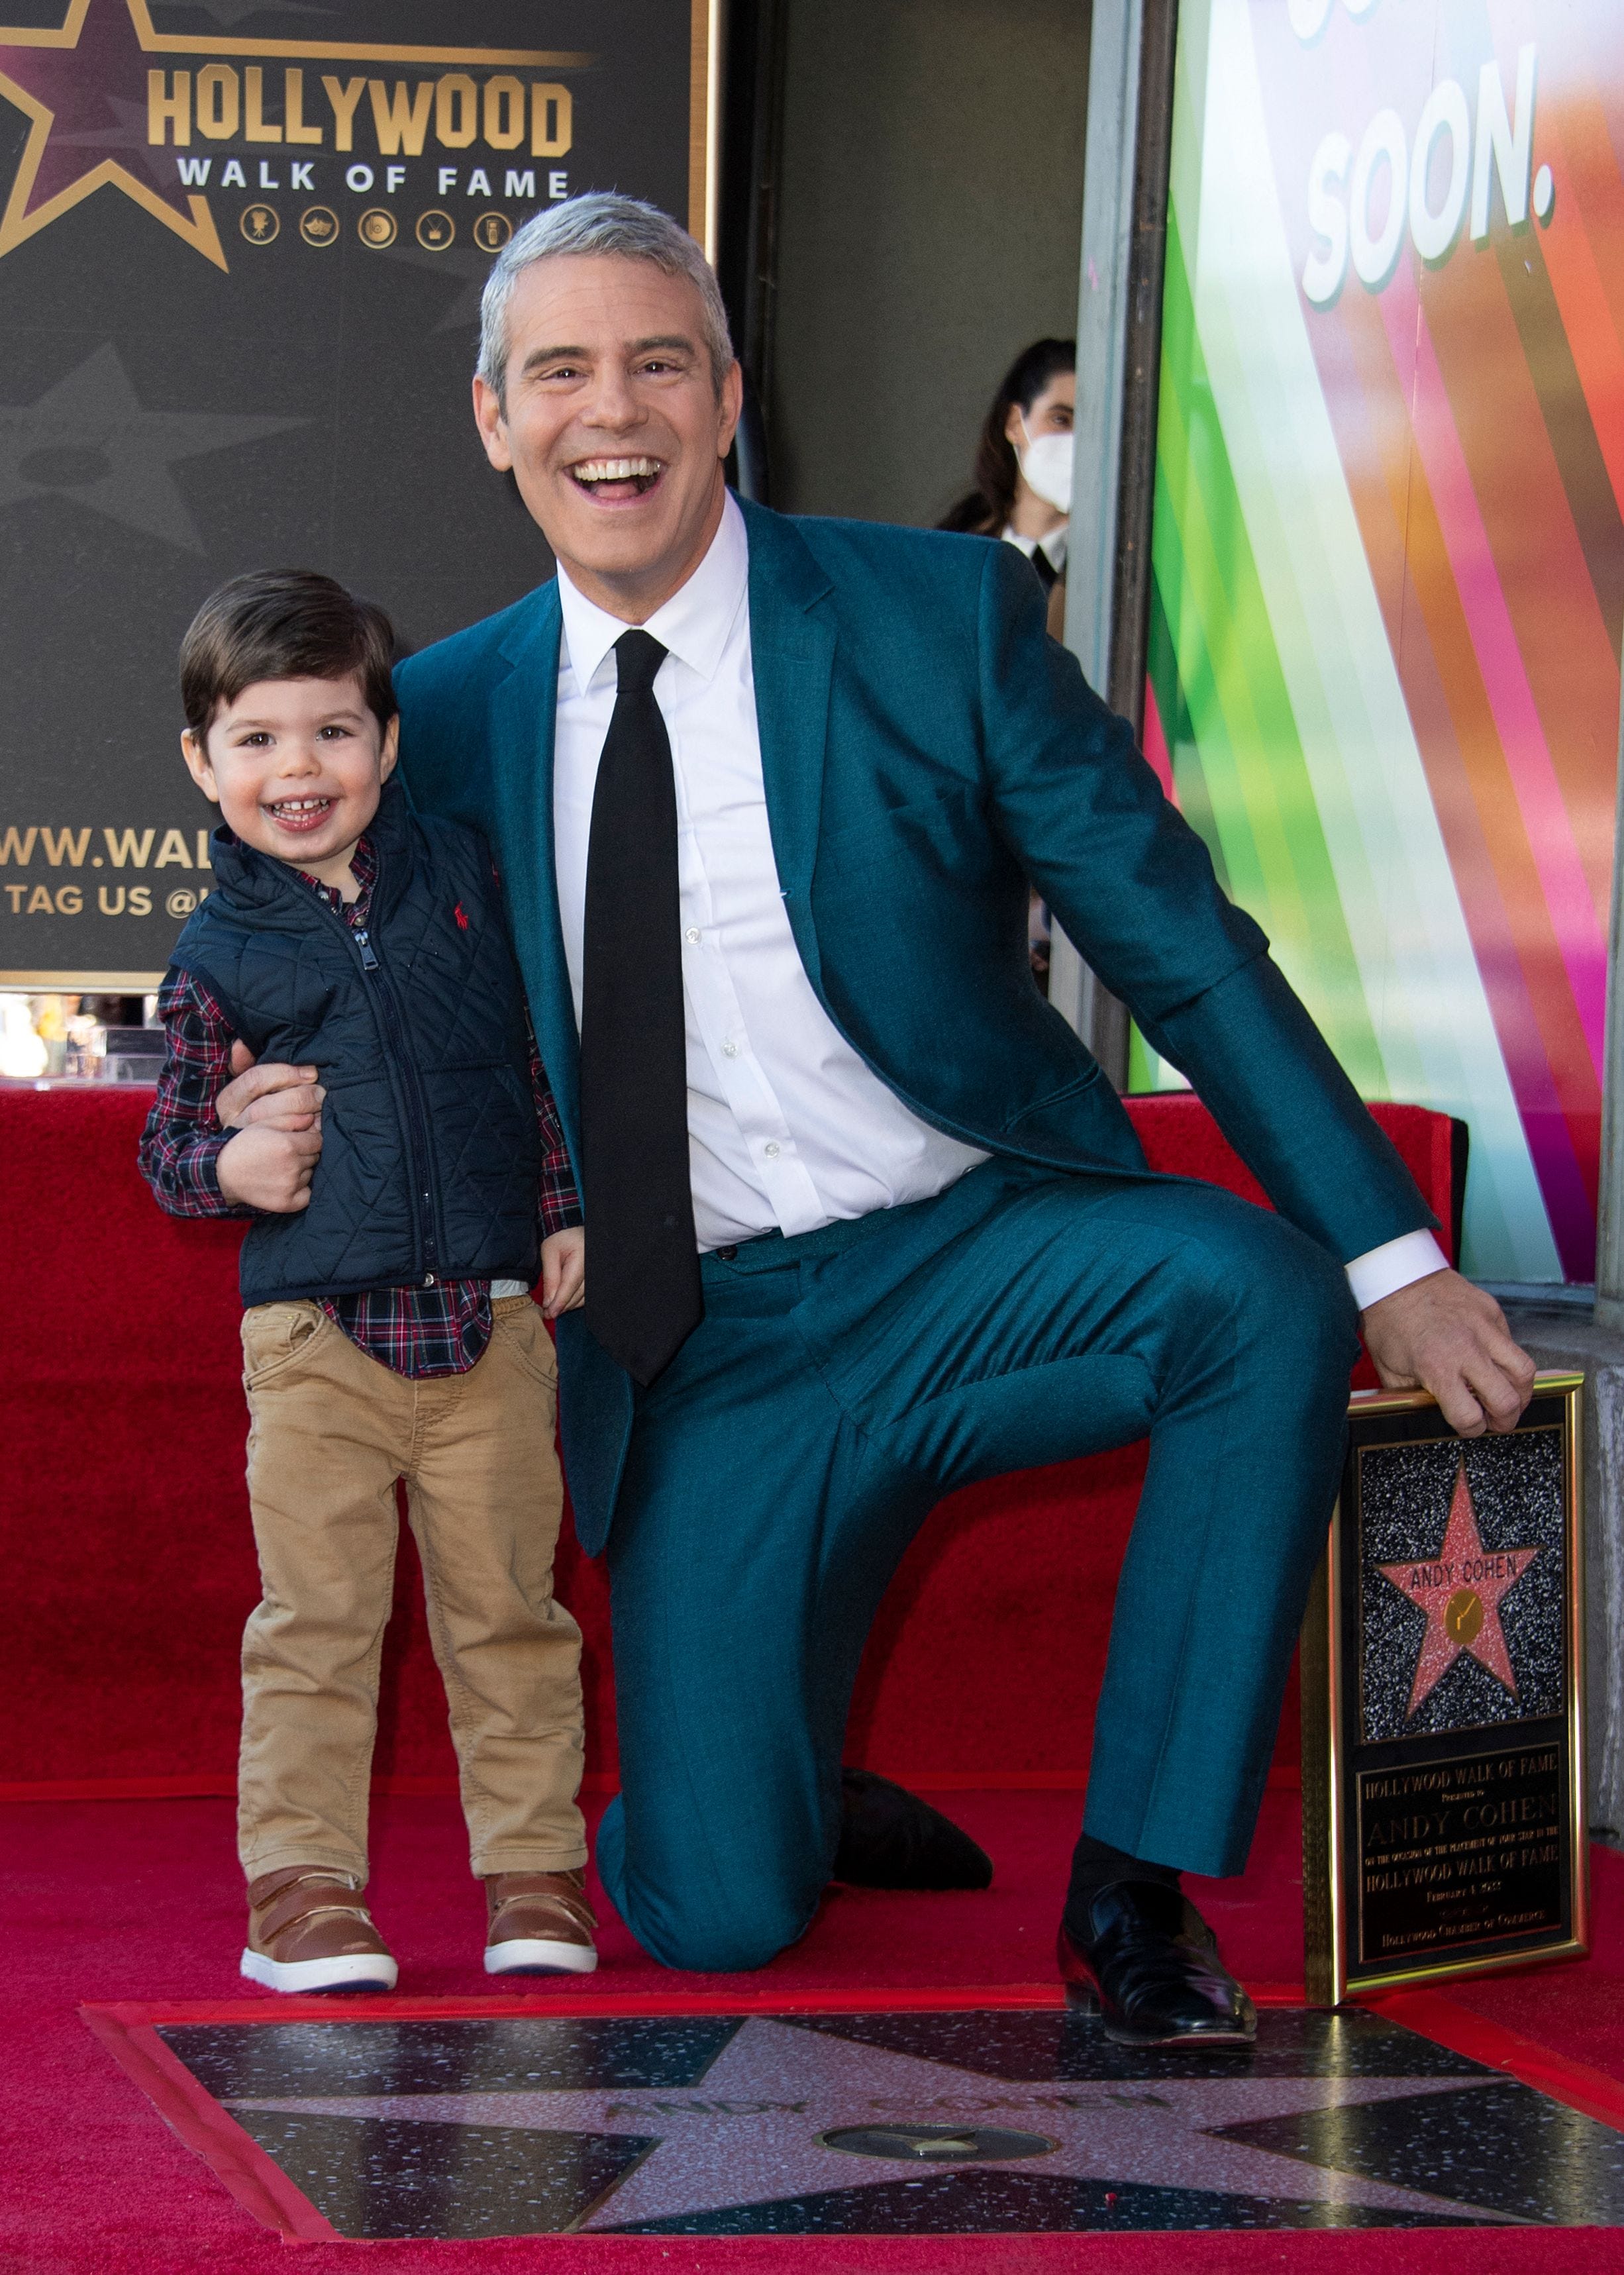 Cohen poses with his 3-year-old son Benjamin during the ceremony, which happened to fall on Benjamin's birthday.<br> <br> “It’s your birthday, we’ve got cookies waiting for you man,” Cohen <a href="https://www.youtube.com/watch?v=Fapm7-u6Ds0&t=1534s">said</a> to his son toward the end of his speech.